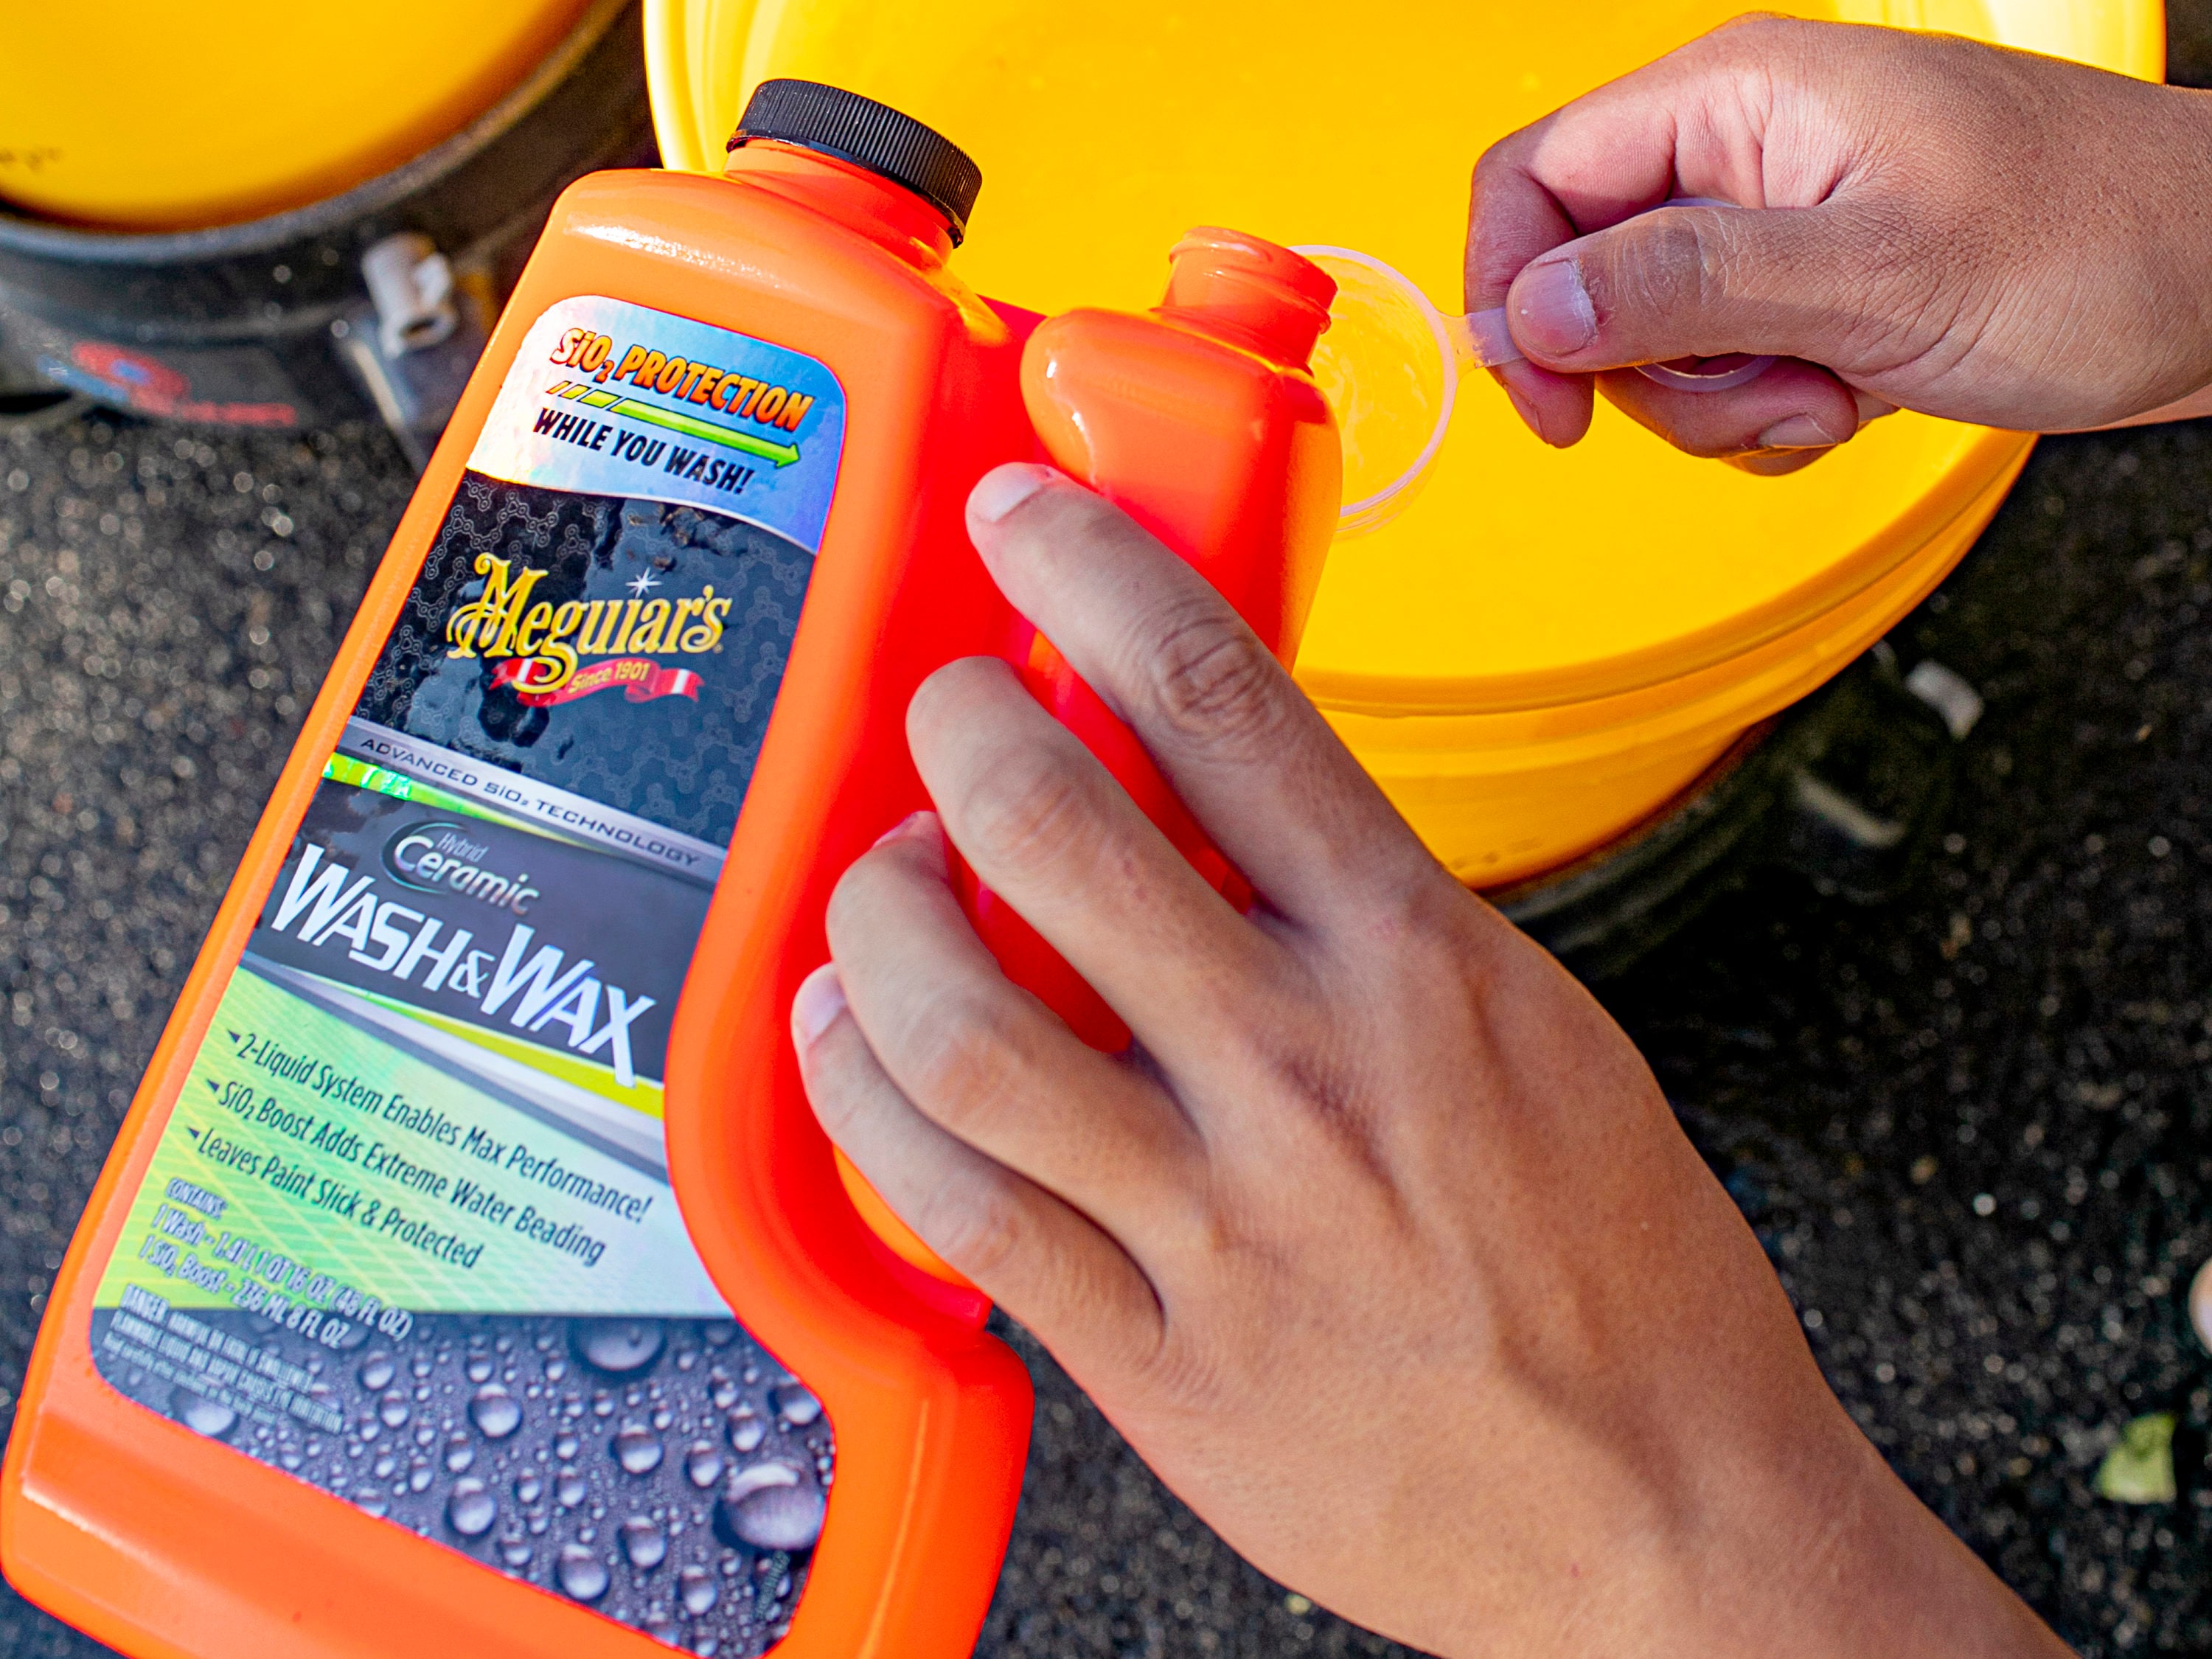 Meguiar's - As the weather gets nicer ☀️ it's time to get out and wash! 😎  Pictured here is our 2018 Costco exclusive Carnauba Wash & Wax in 1 gal.  Look for